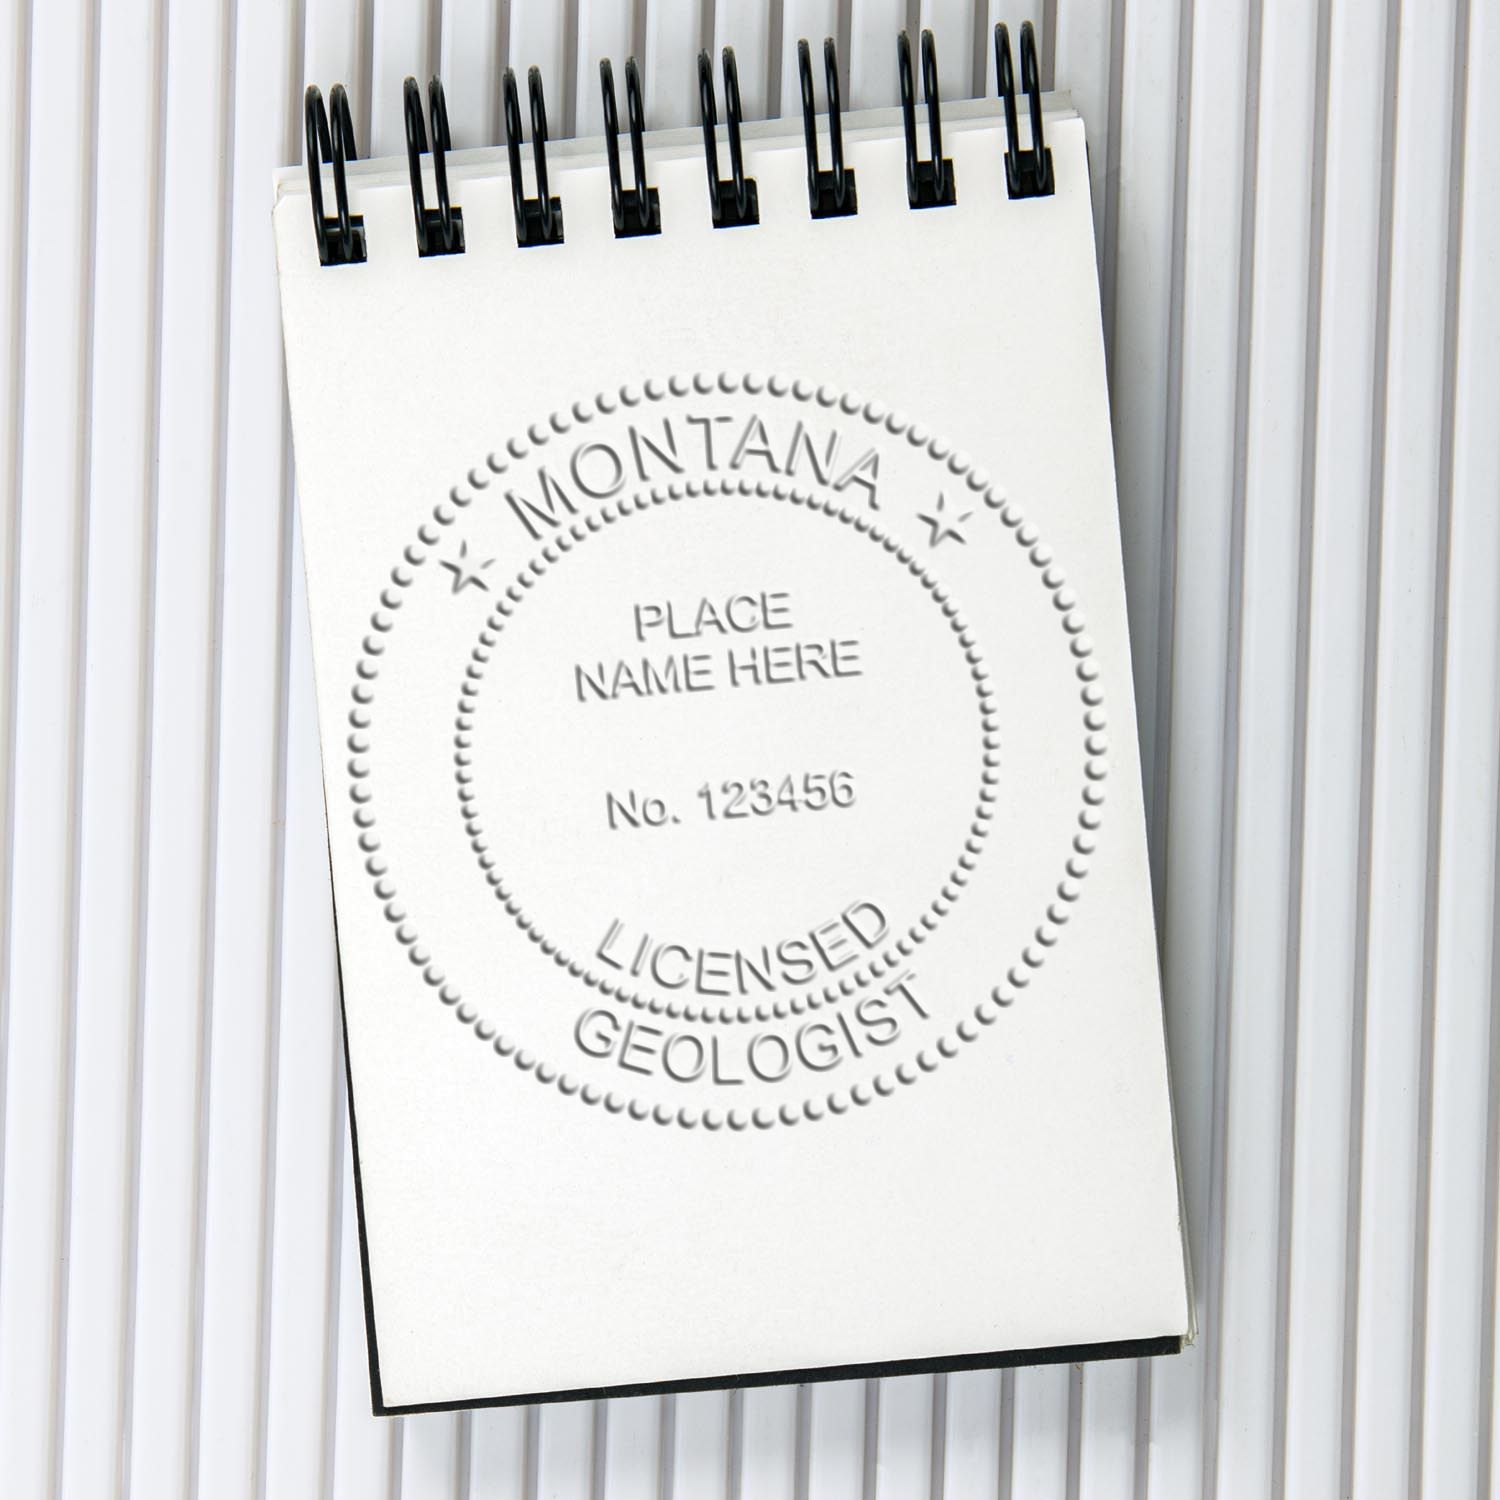 A stamped imprint of the State of Montana Extended Long Reach Geologist Seal in this stylish lifestyle photo, setting the tone for a unique and personalized product.